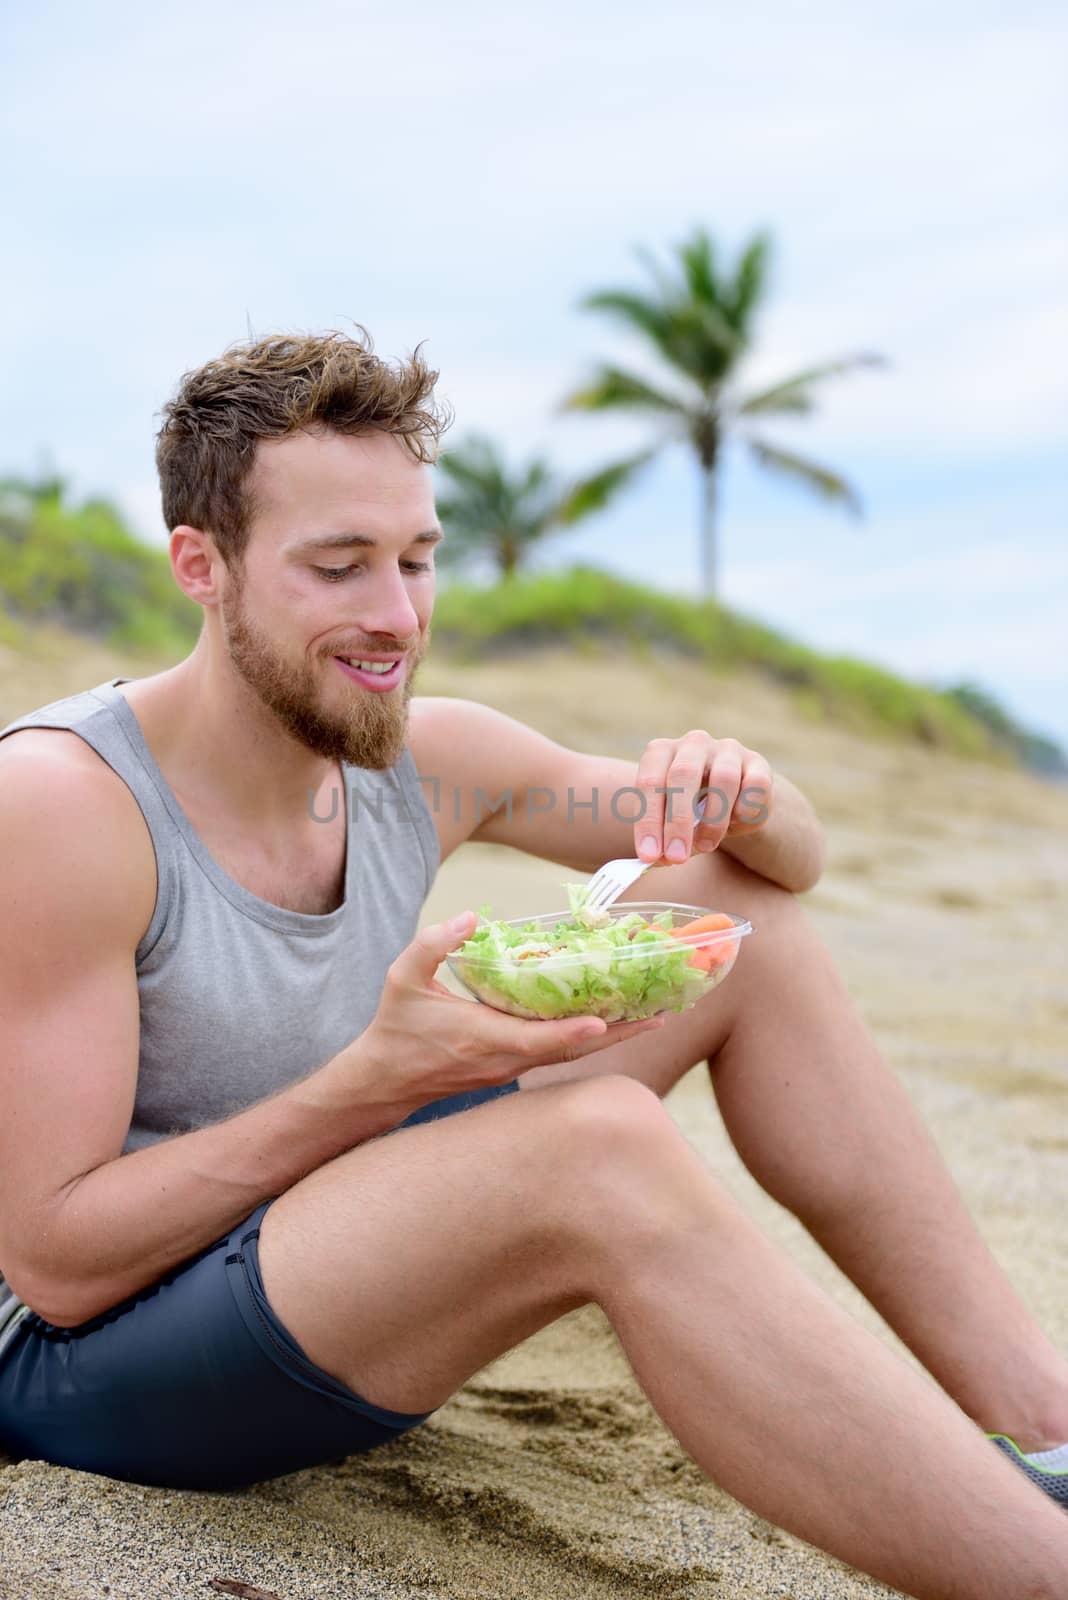 Healthy fit man on vegan diet eating organic food on beach. Muscular young fitness guy after exercise eating take-out food of prepared fresh salad and veggies. by Maridav